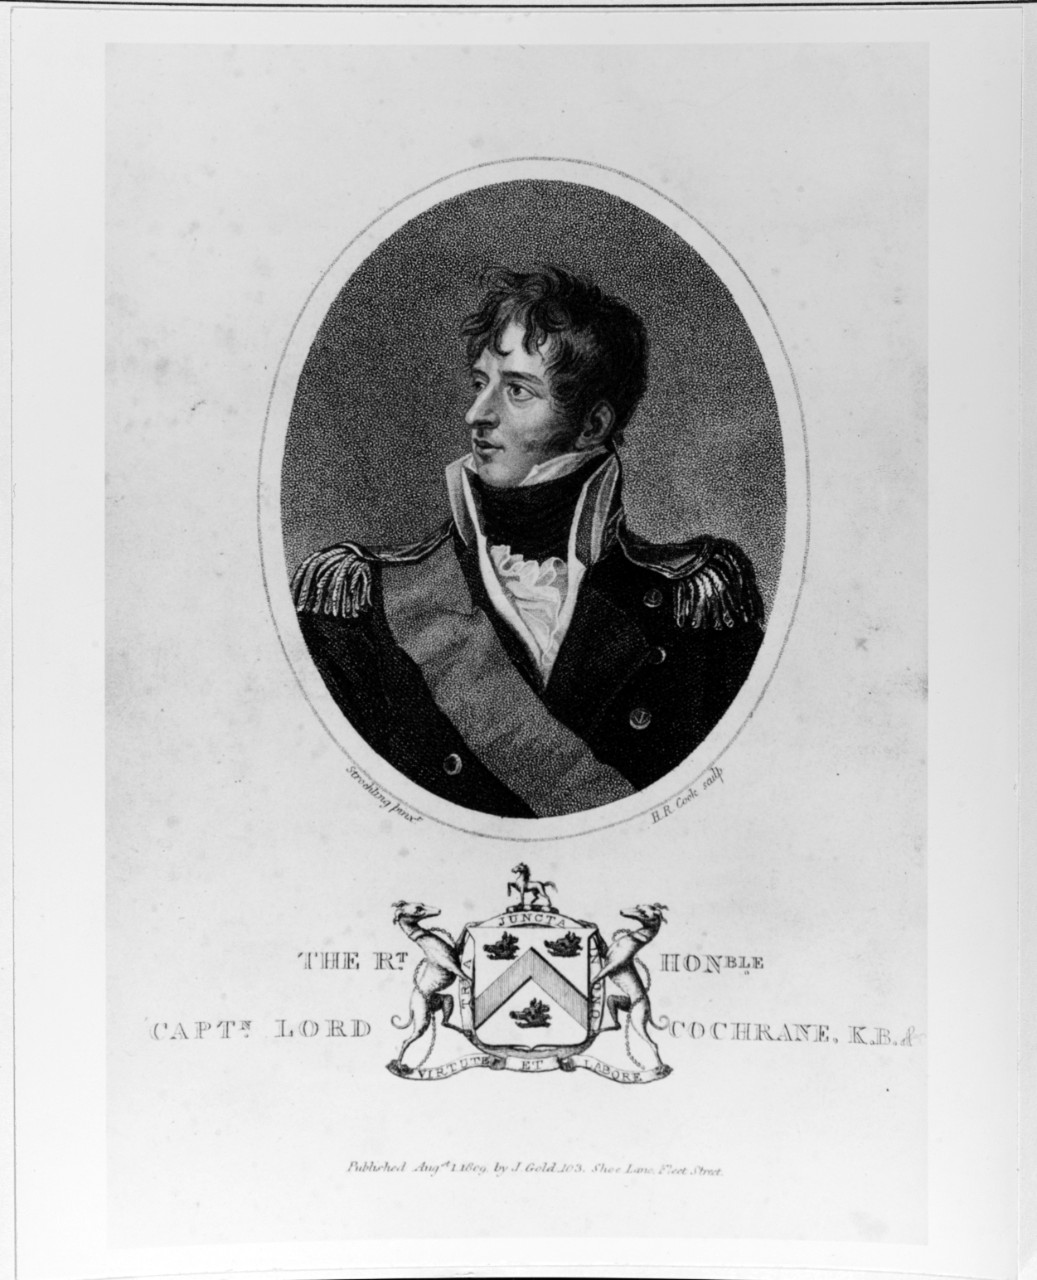 Thomas Cochrane, Earl of Dondonald (1775-1860), British and South American Naval Officer.